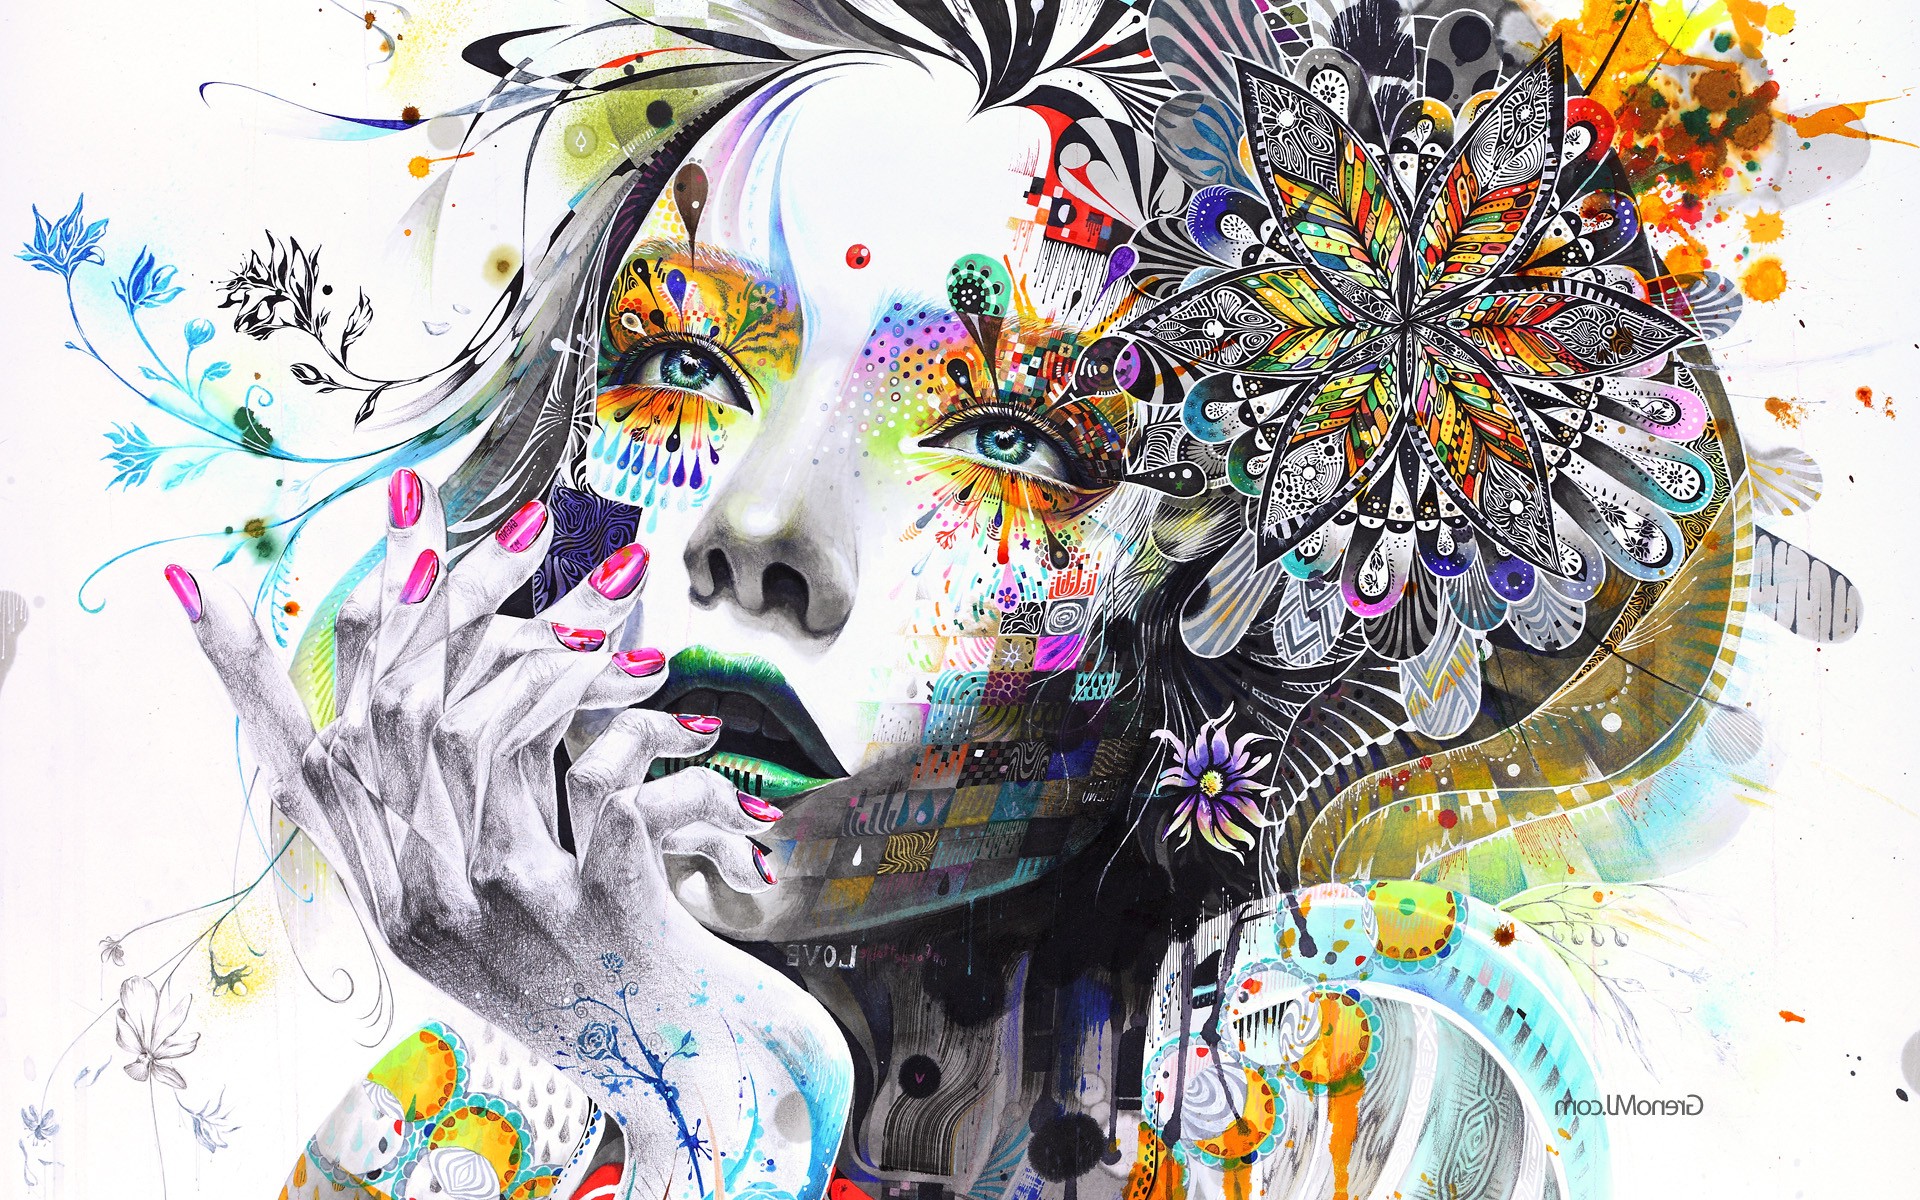 artwork, Hand, Face, Colorful, Women, Surreal, Mosaic, Painting, Anime ...